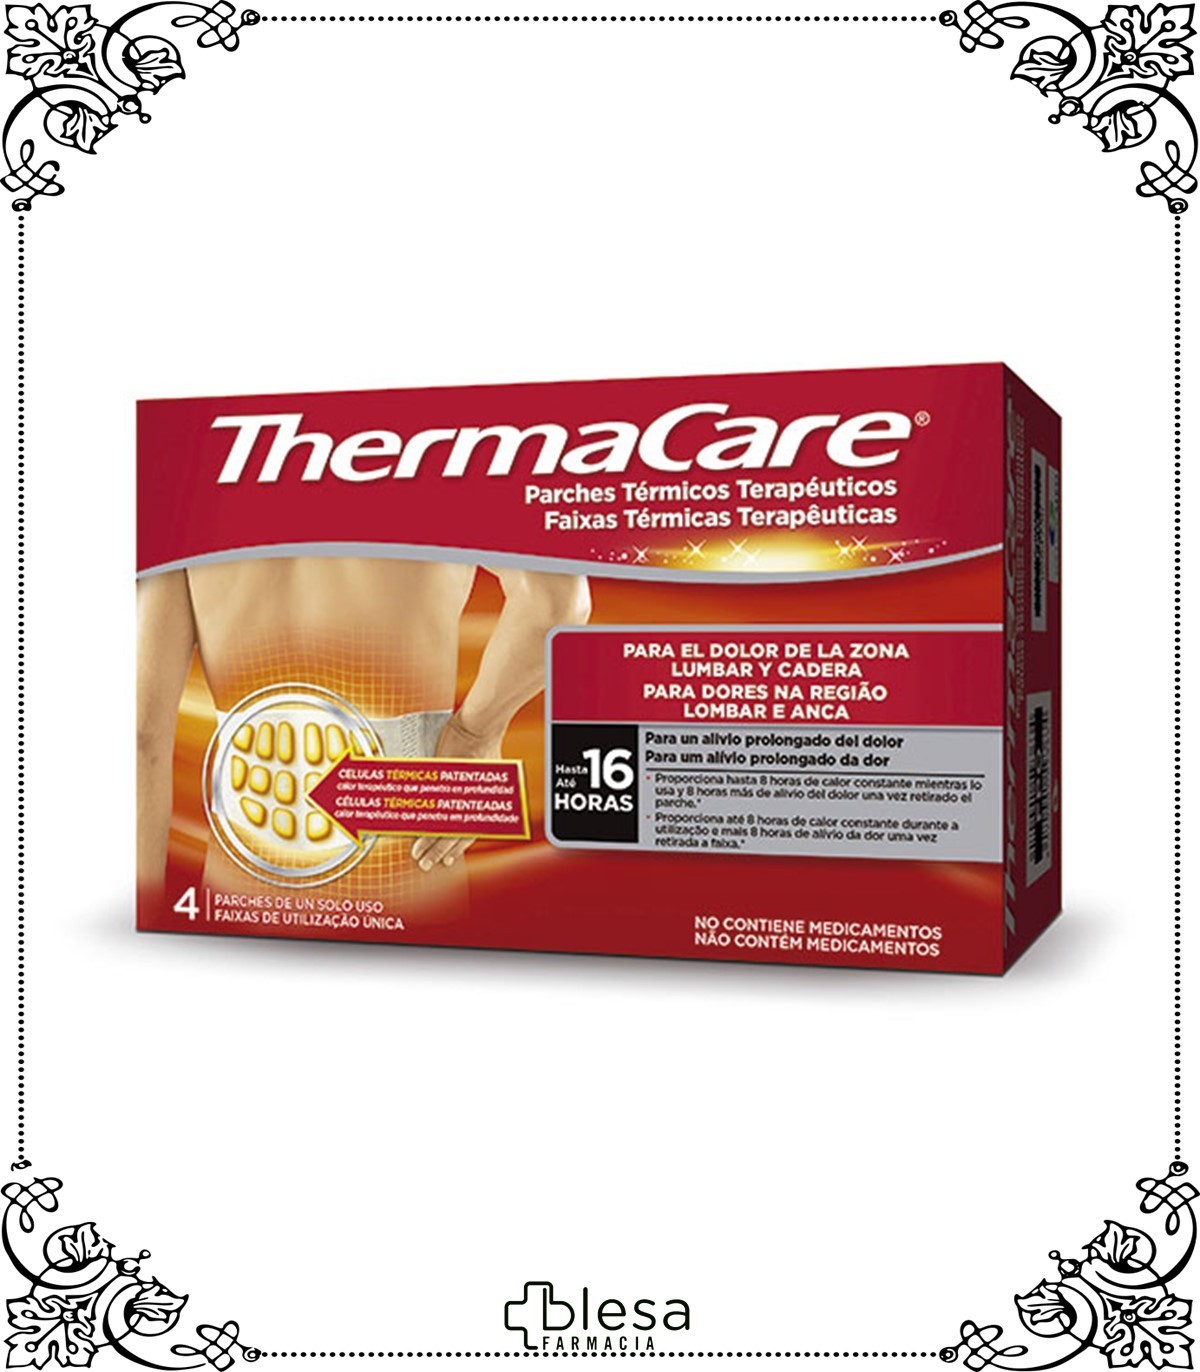 THERMACARE LUMBAR CADERA 4 PARCHES TERMICOS